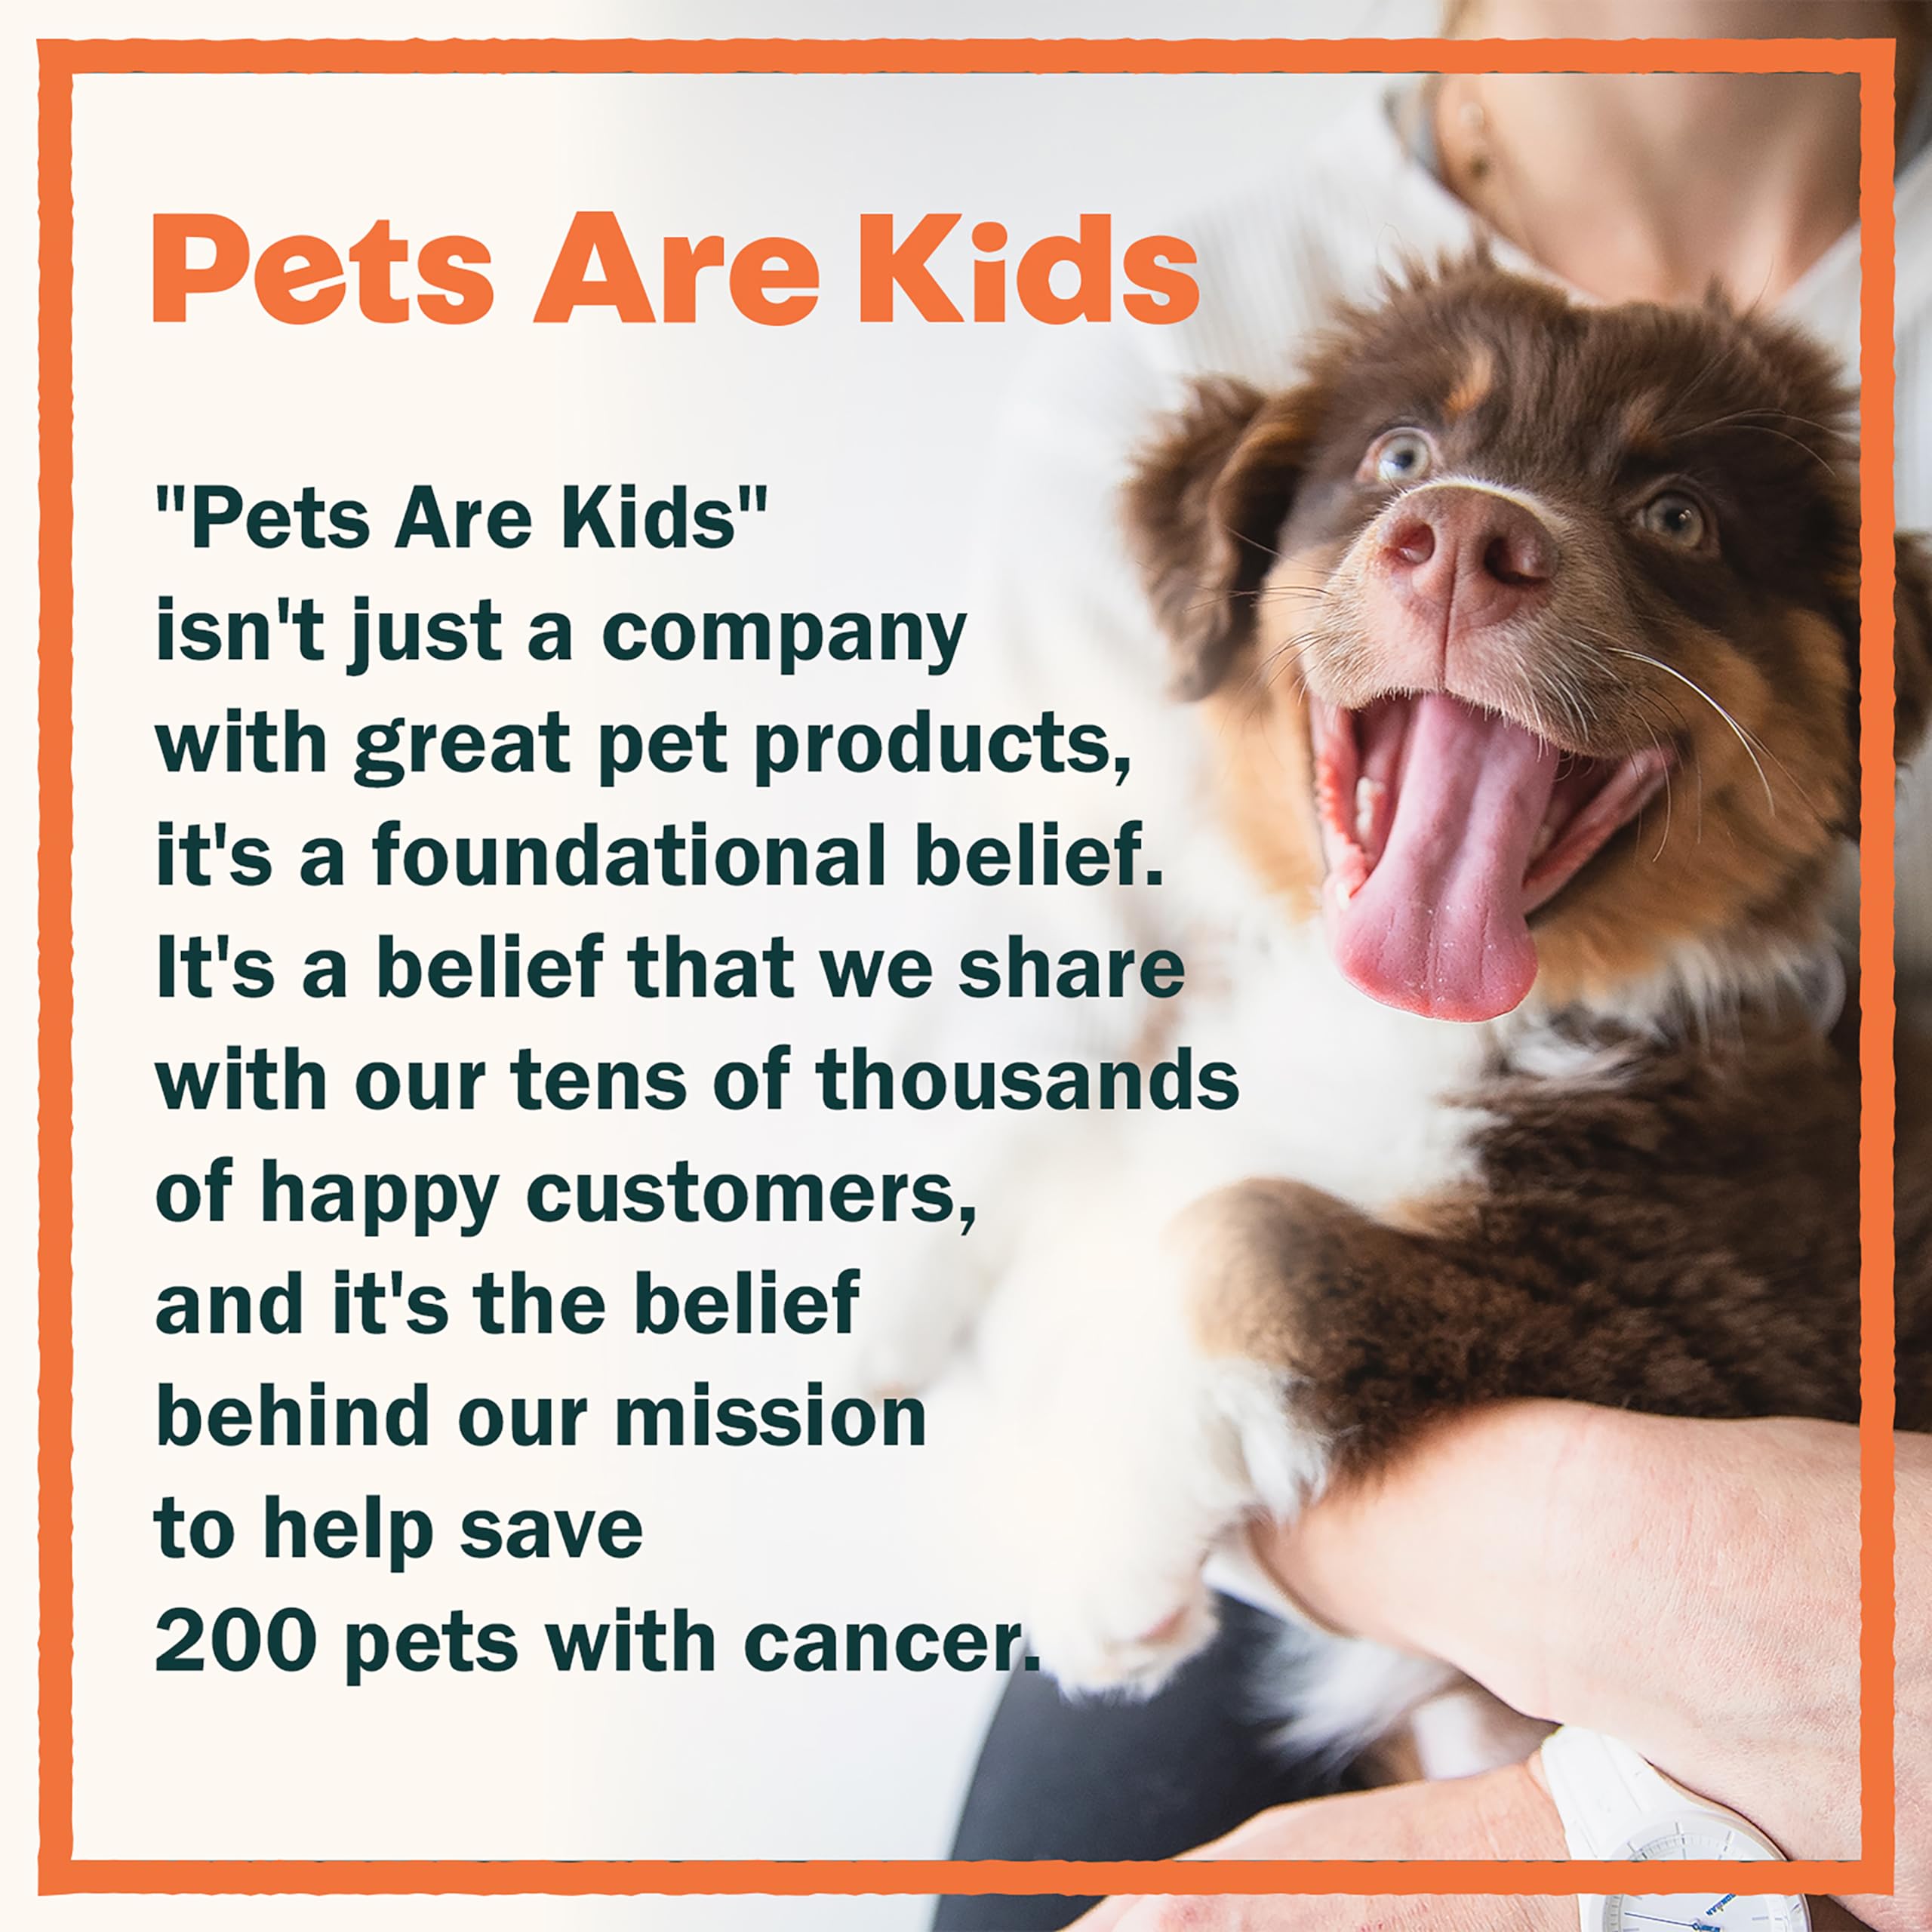 Pets are kids